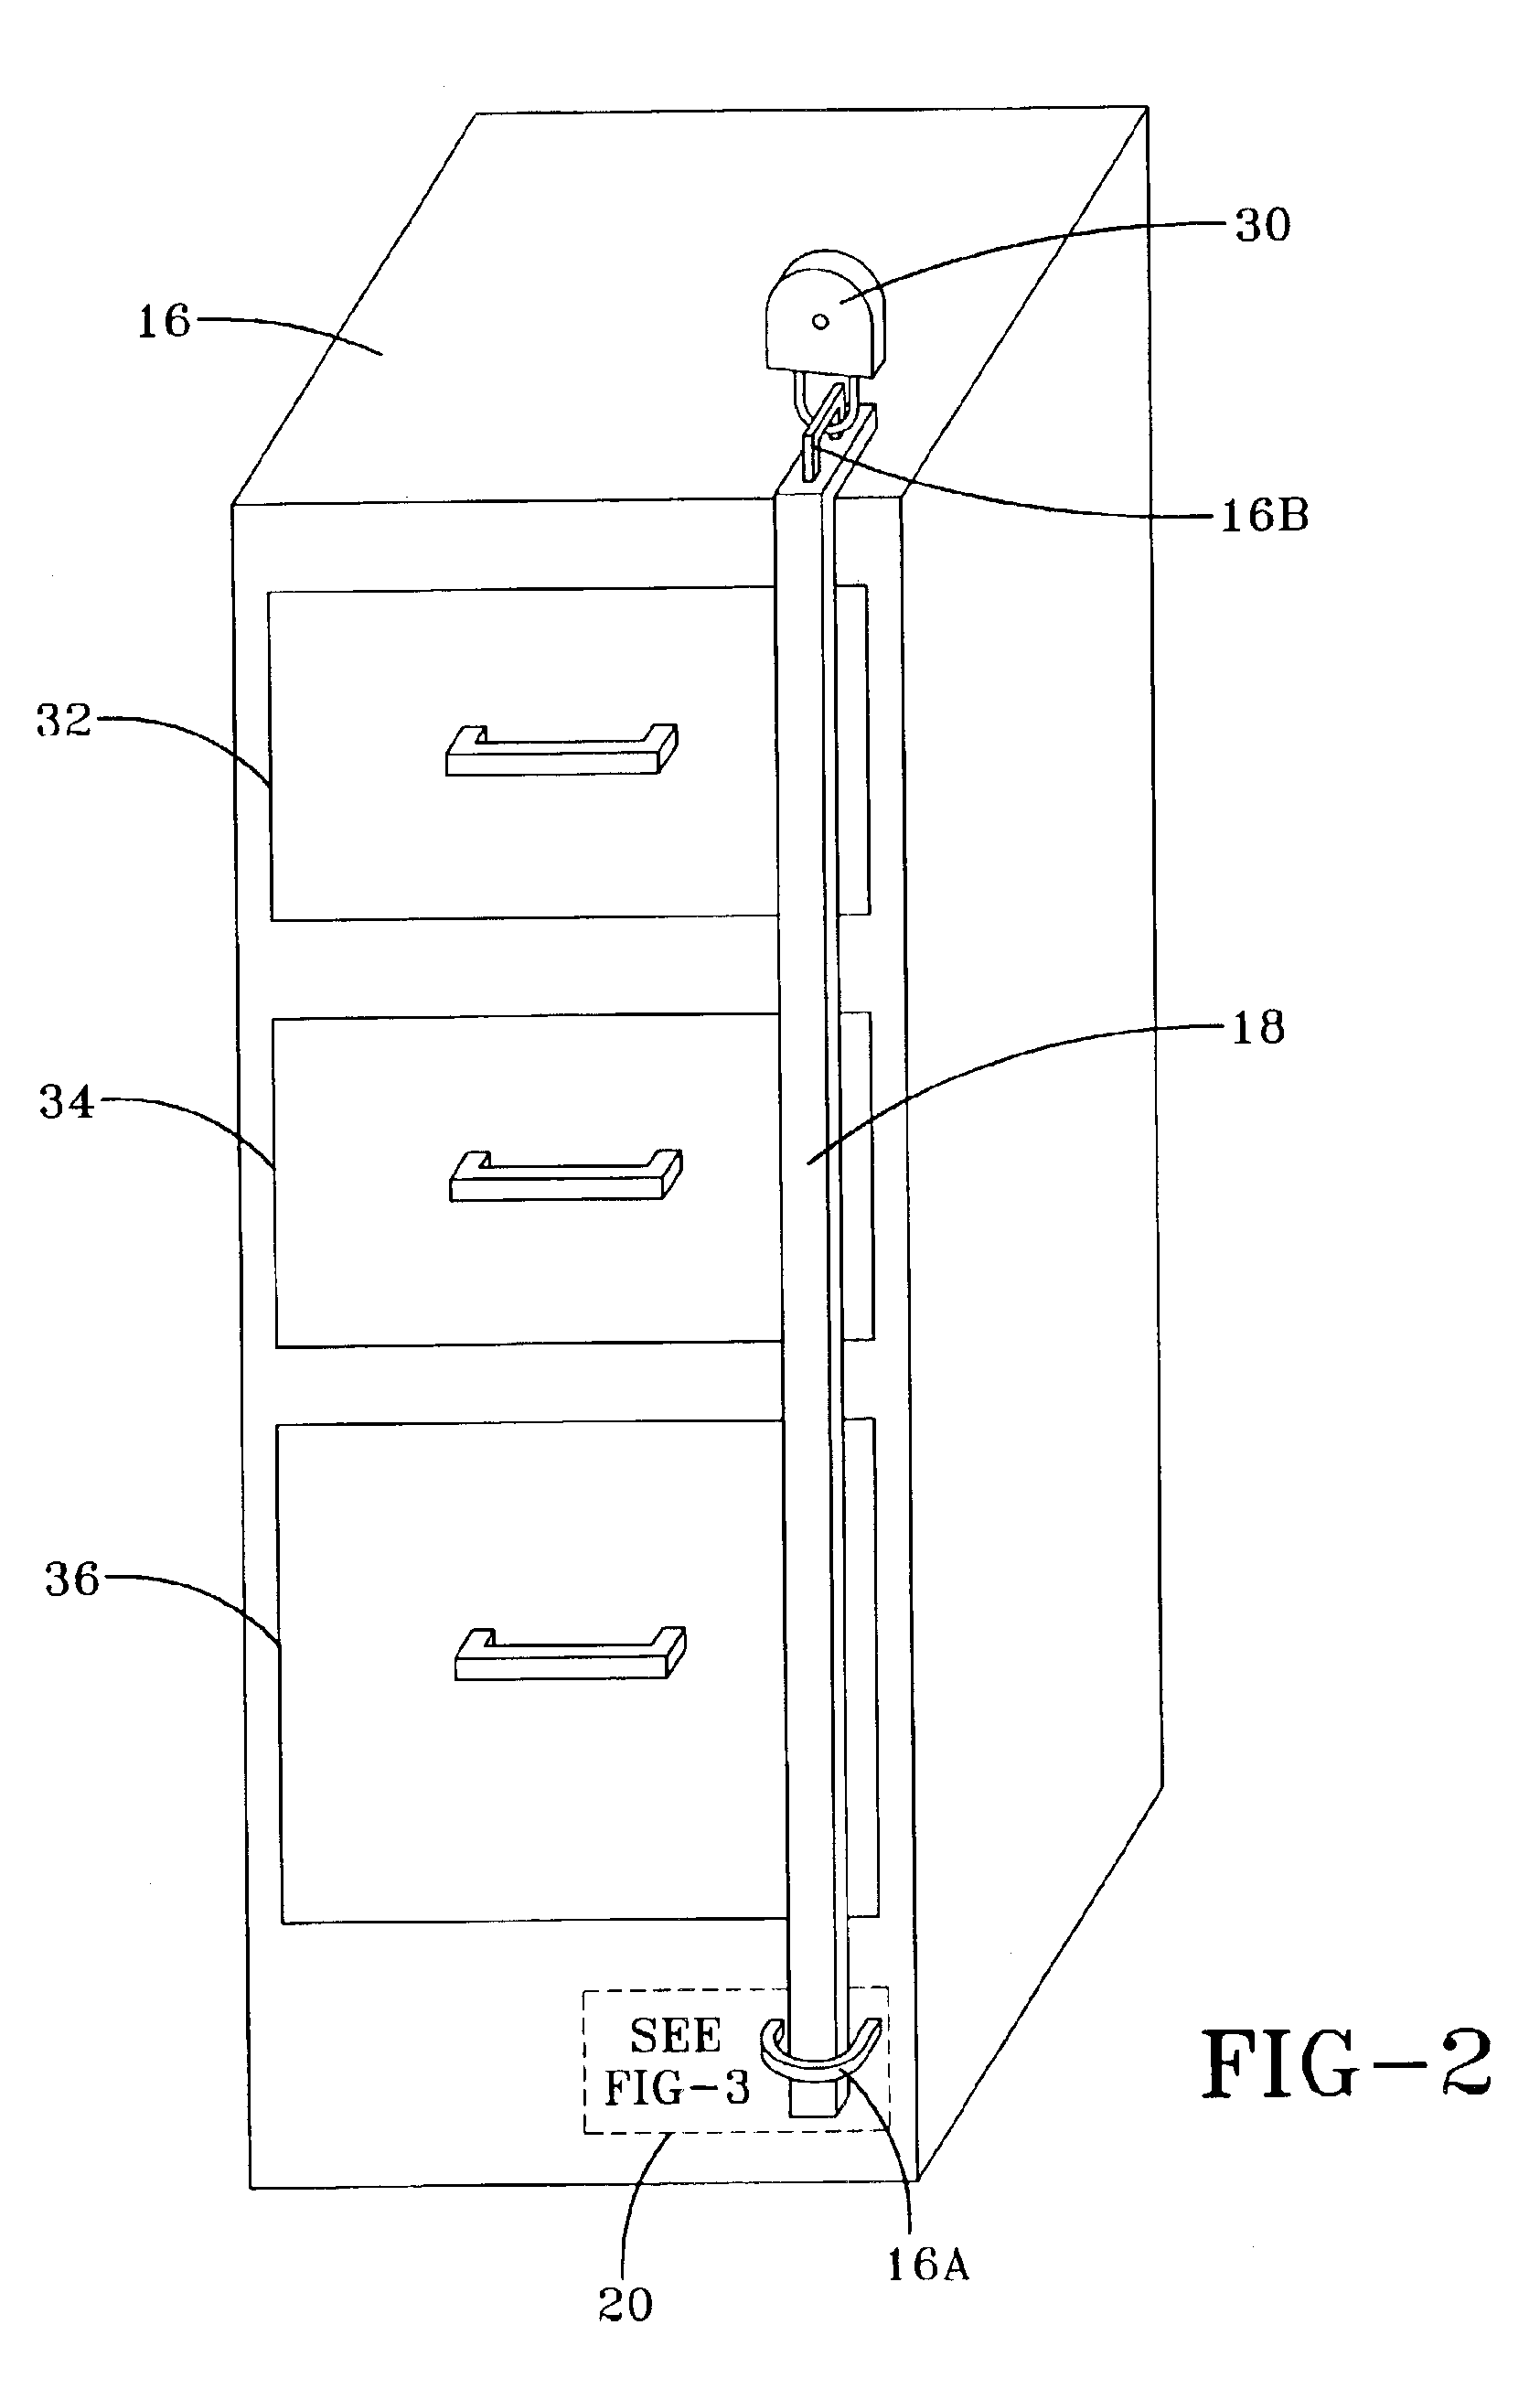 Electronic status monitoring system for security containers